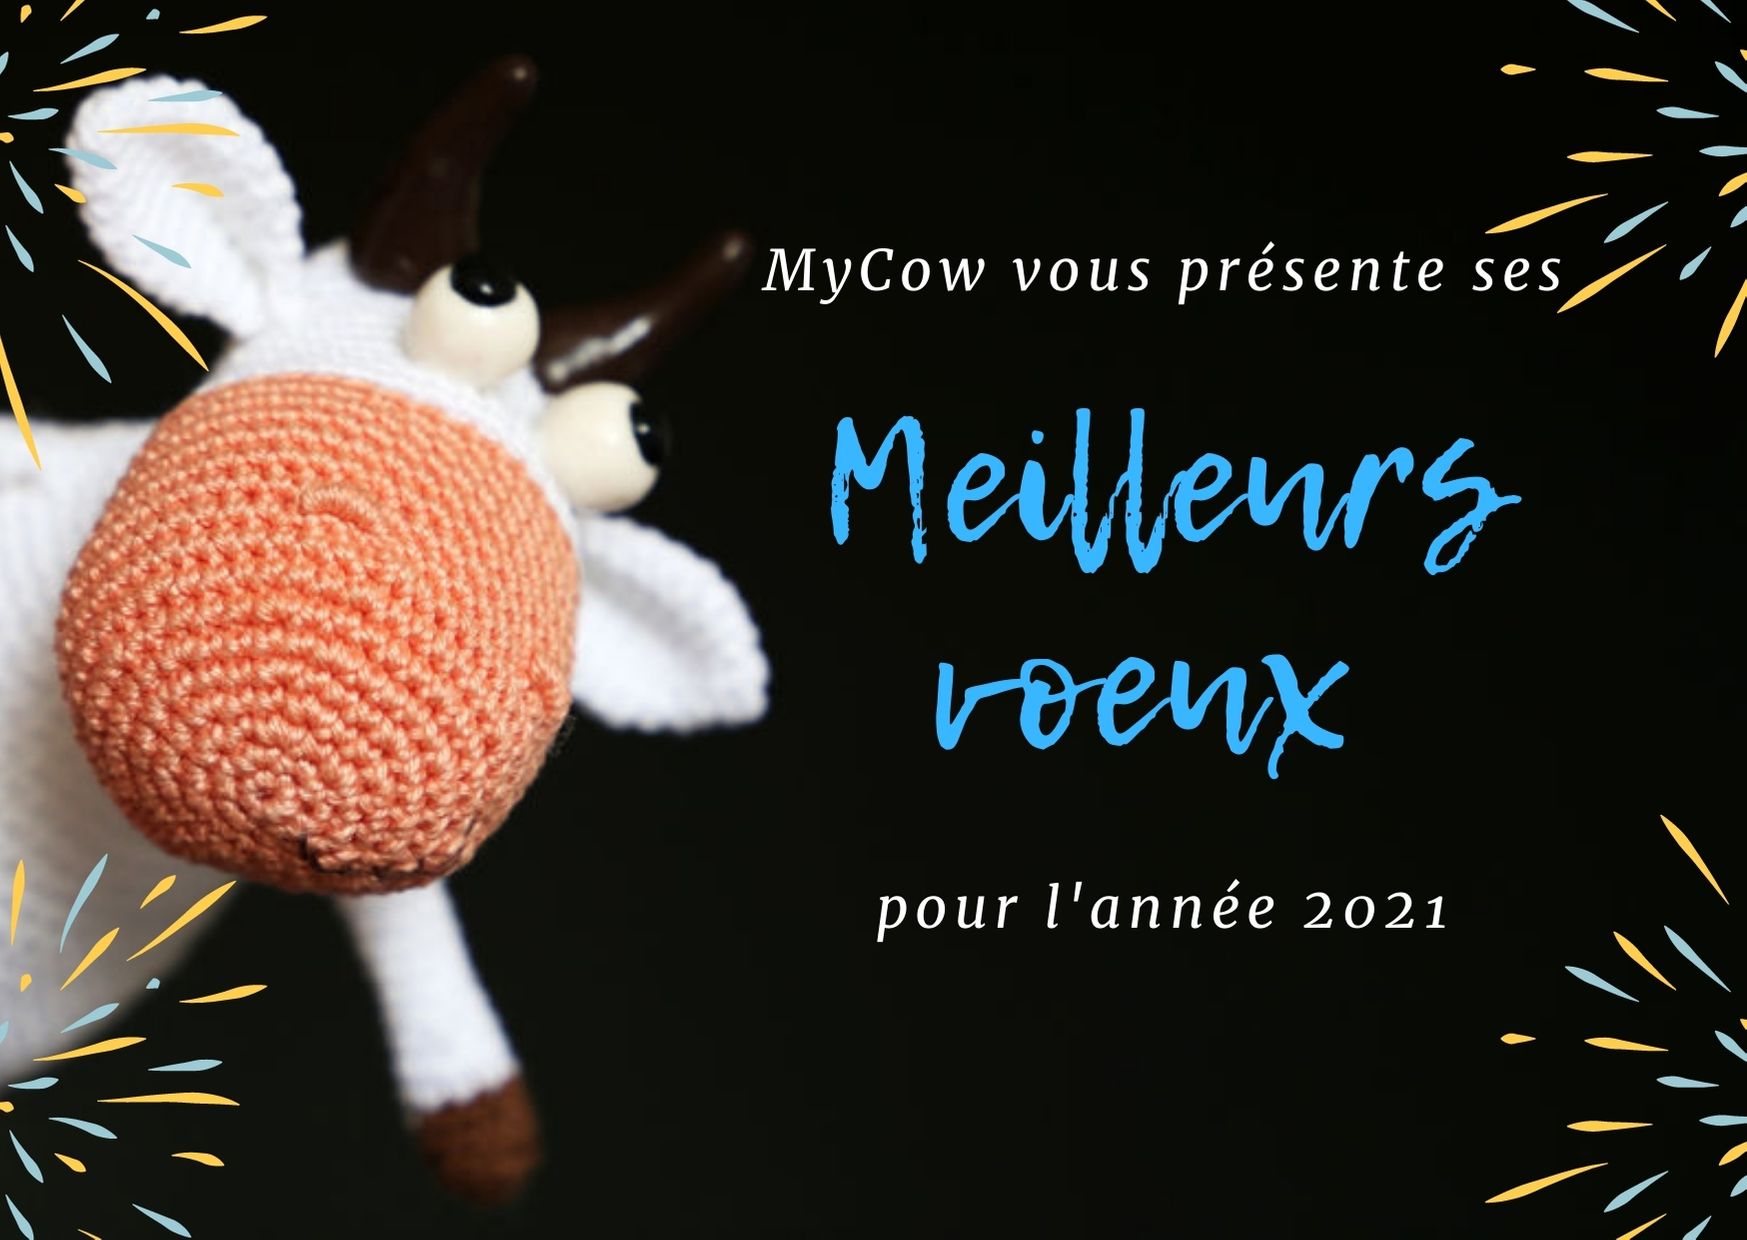 MyCow team wishes you a happy and healthy new year 2021!